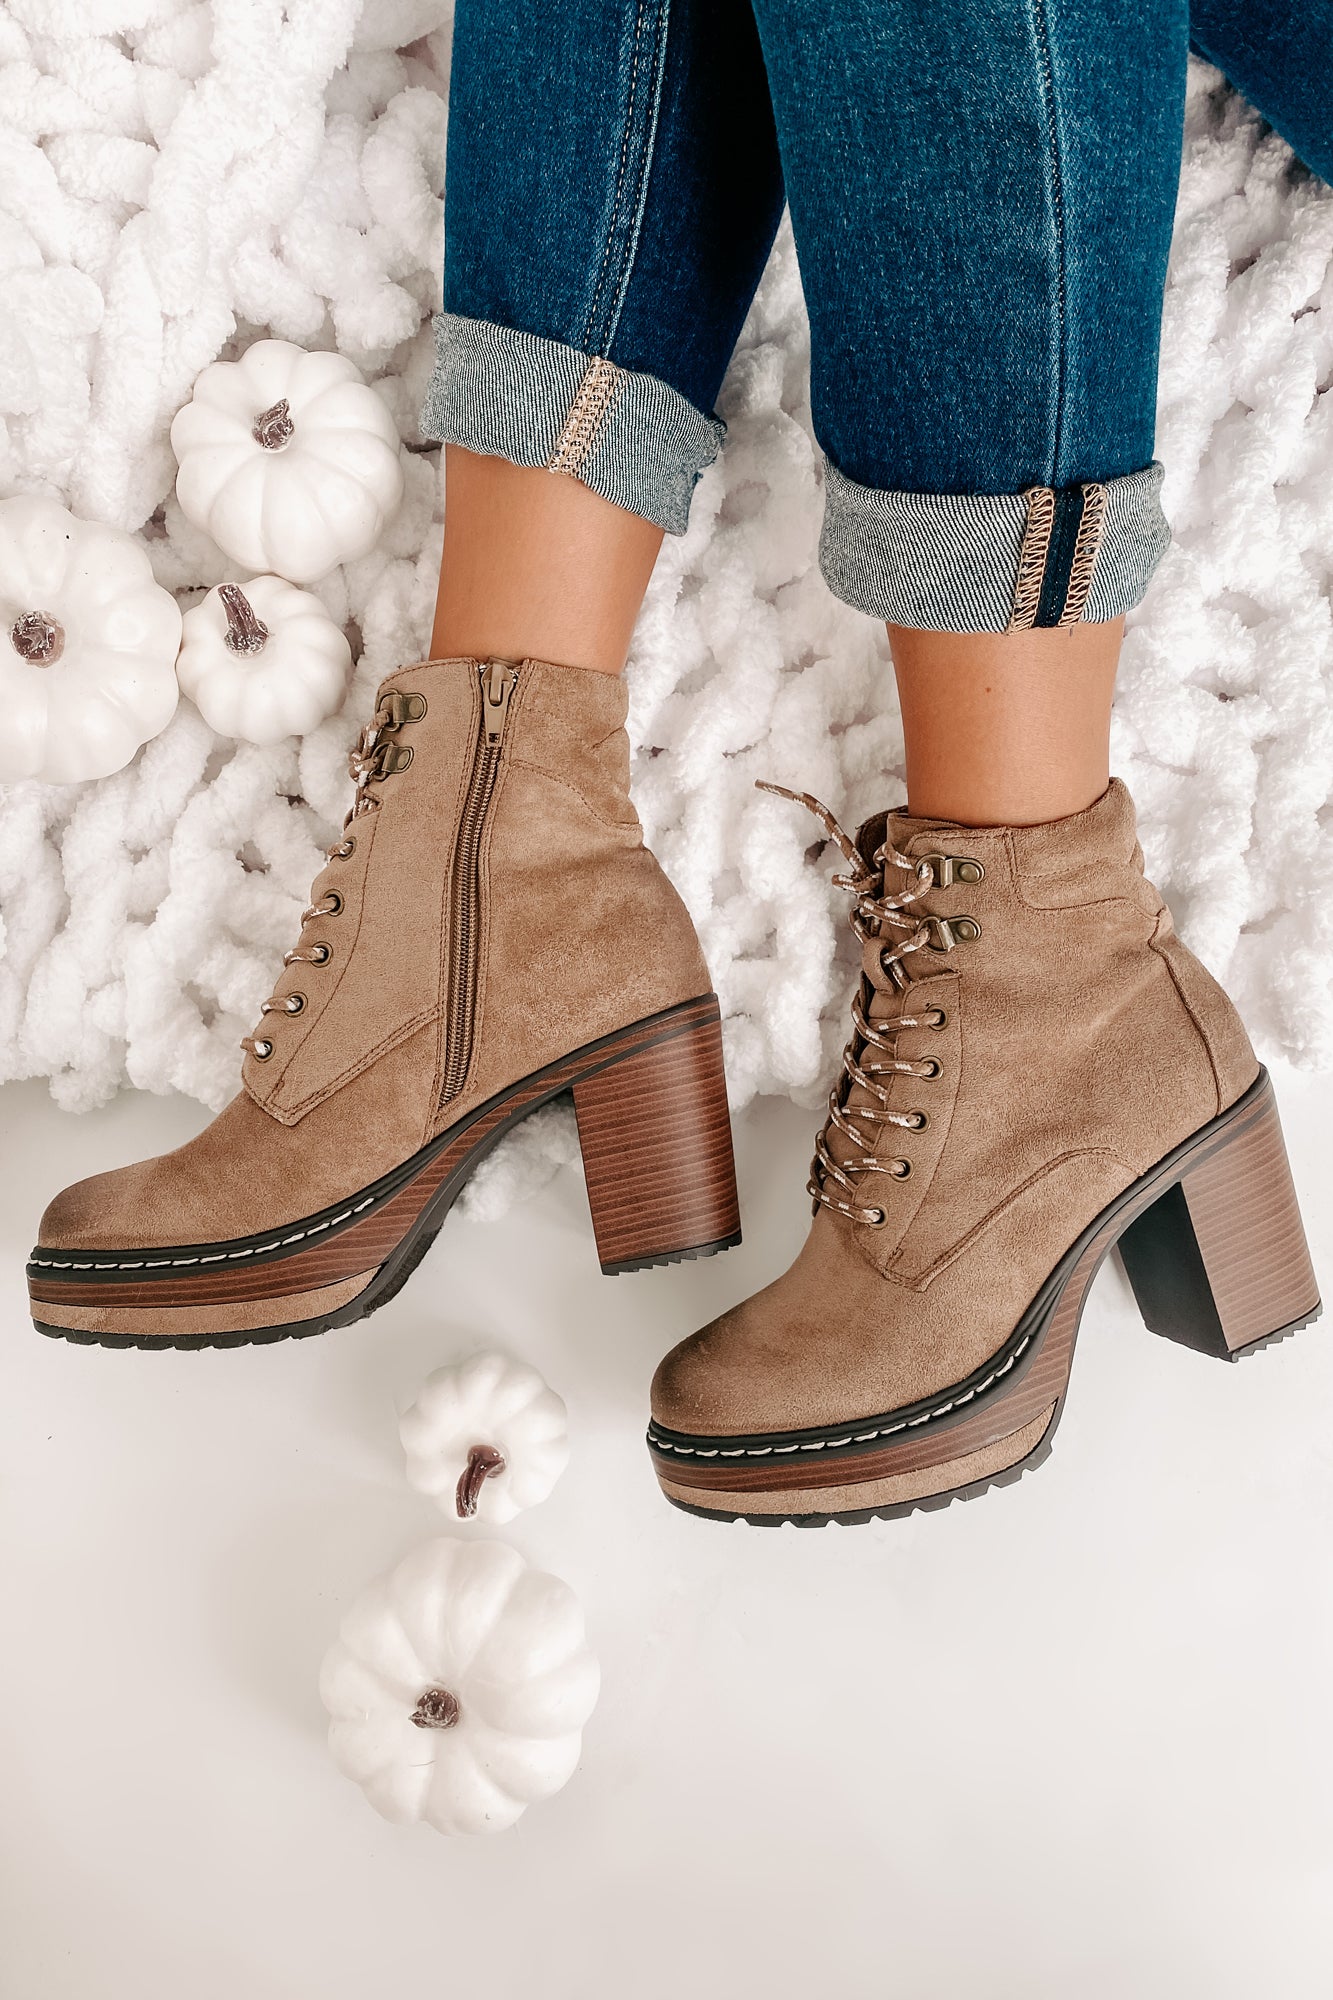 Get Used To It Faux Suede Lace-Up Platform Booties (Taupe) - NanaMacs